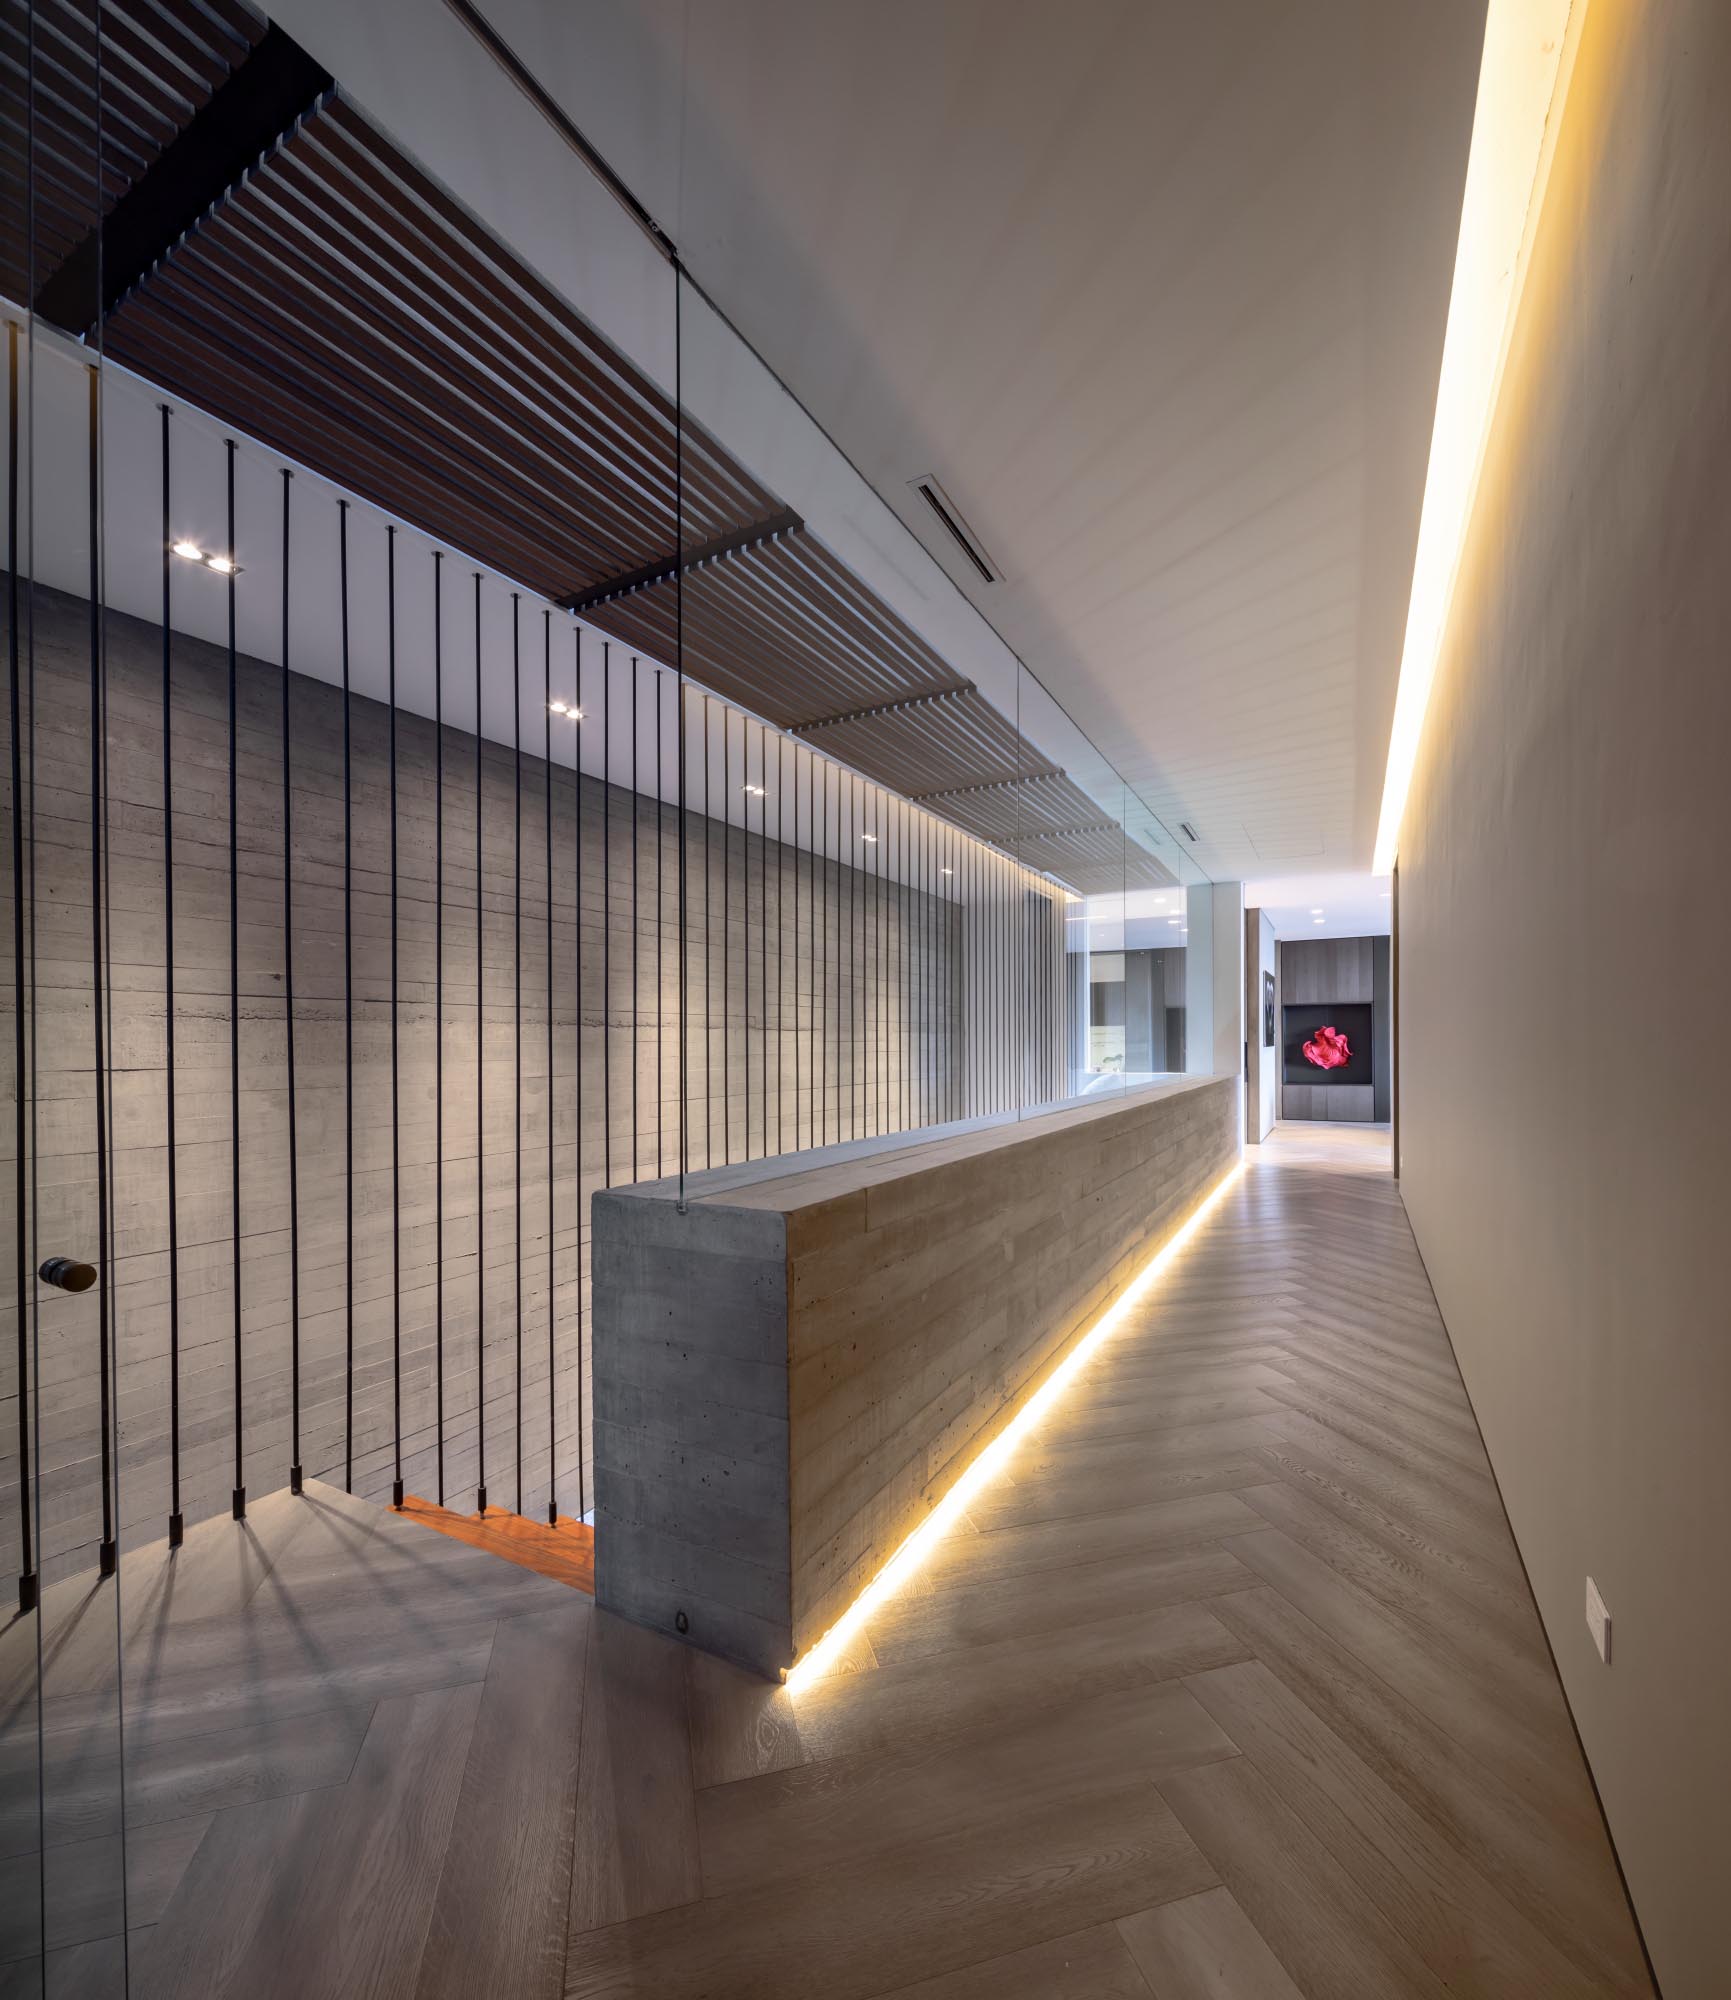 A modern hallway has a glass wall and hidden lighting incorporated into the floor and ceiling levels.